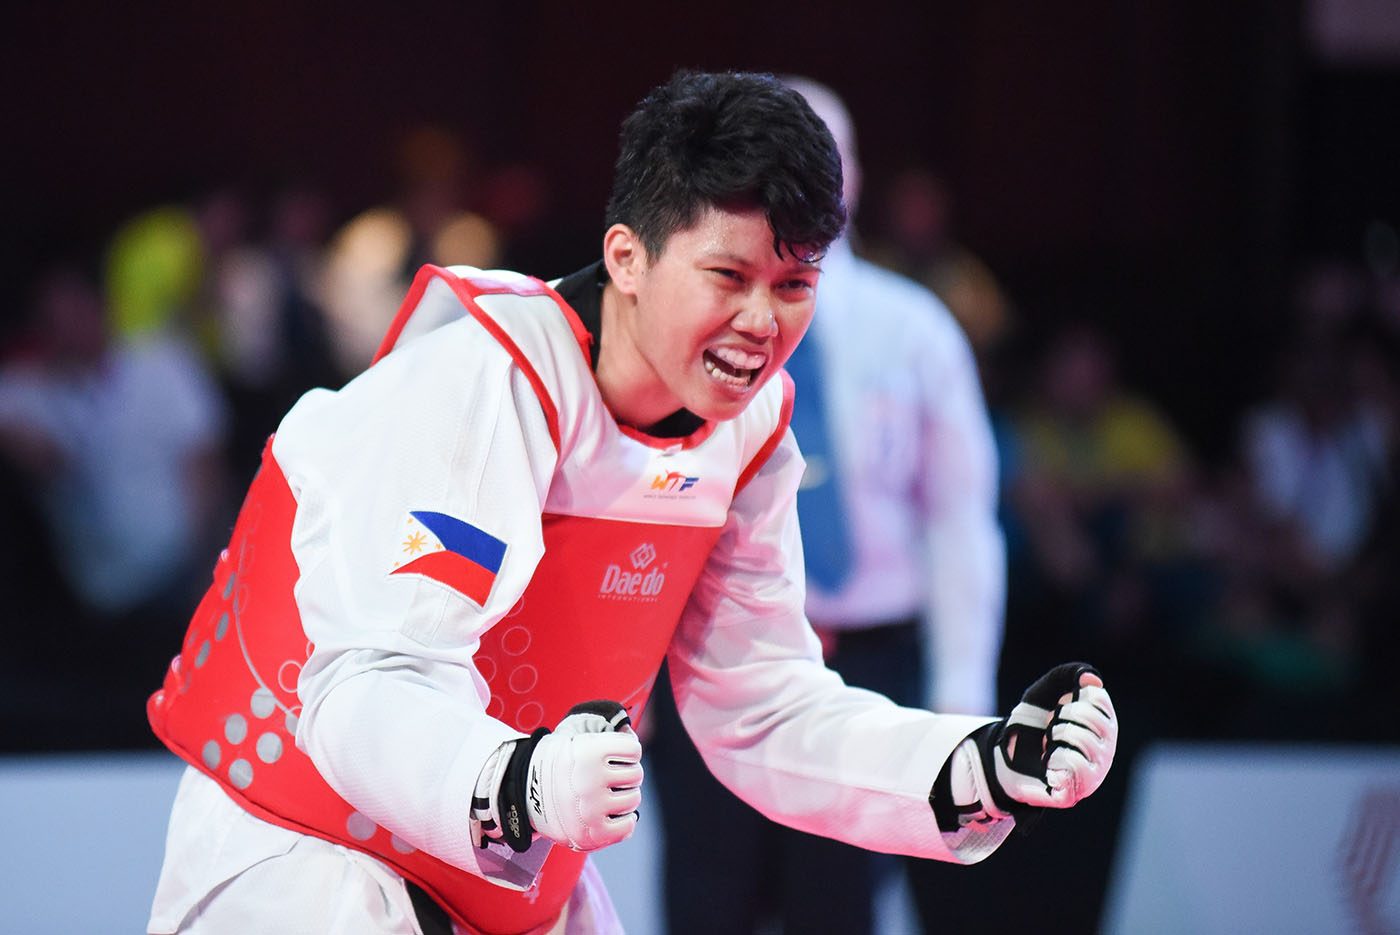 The Philippines’ last Olympian standing prepares for battle